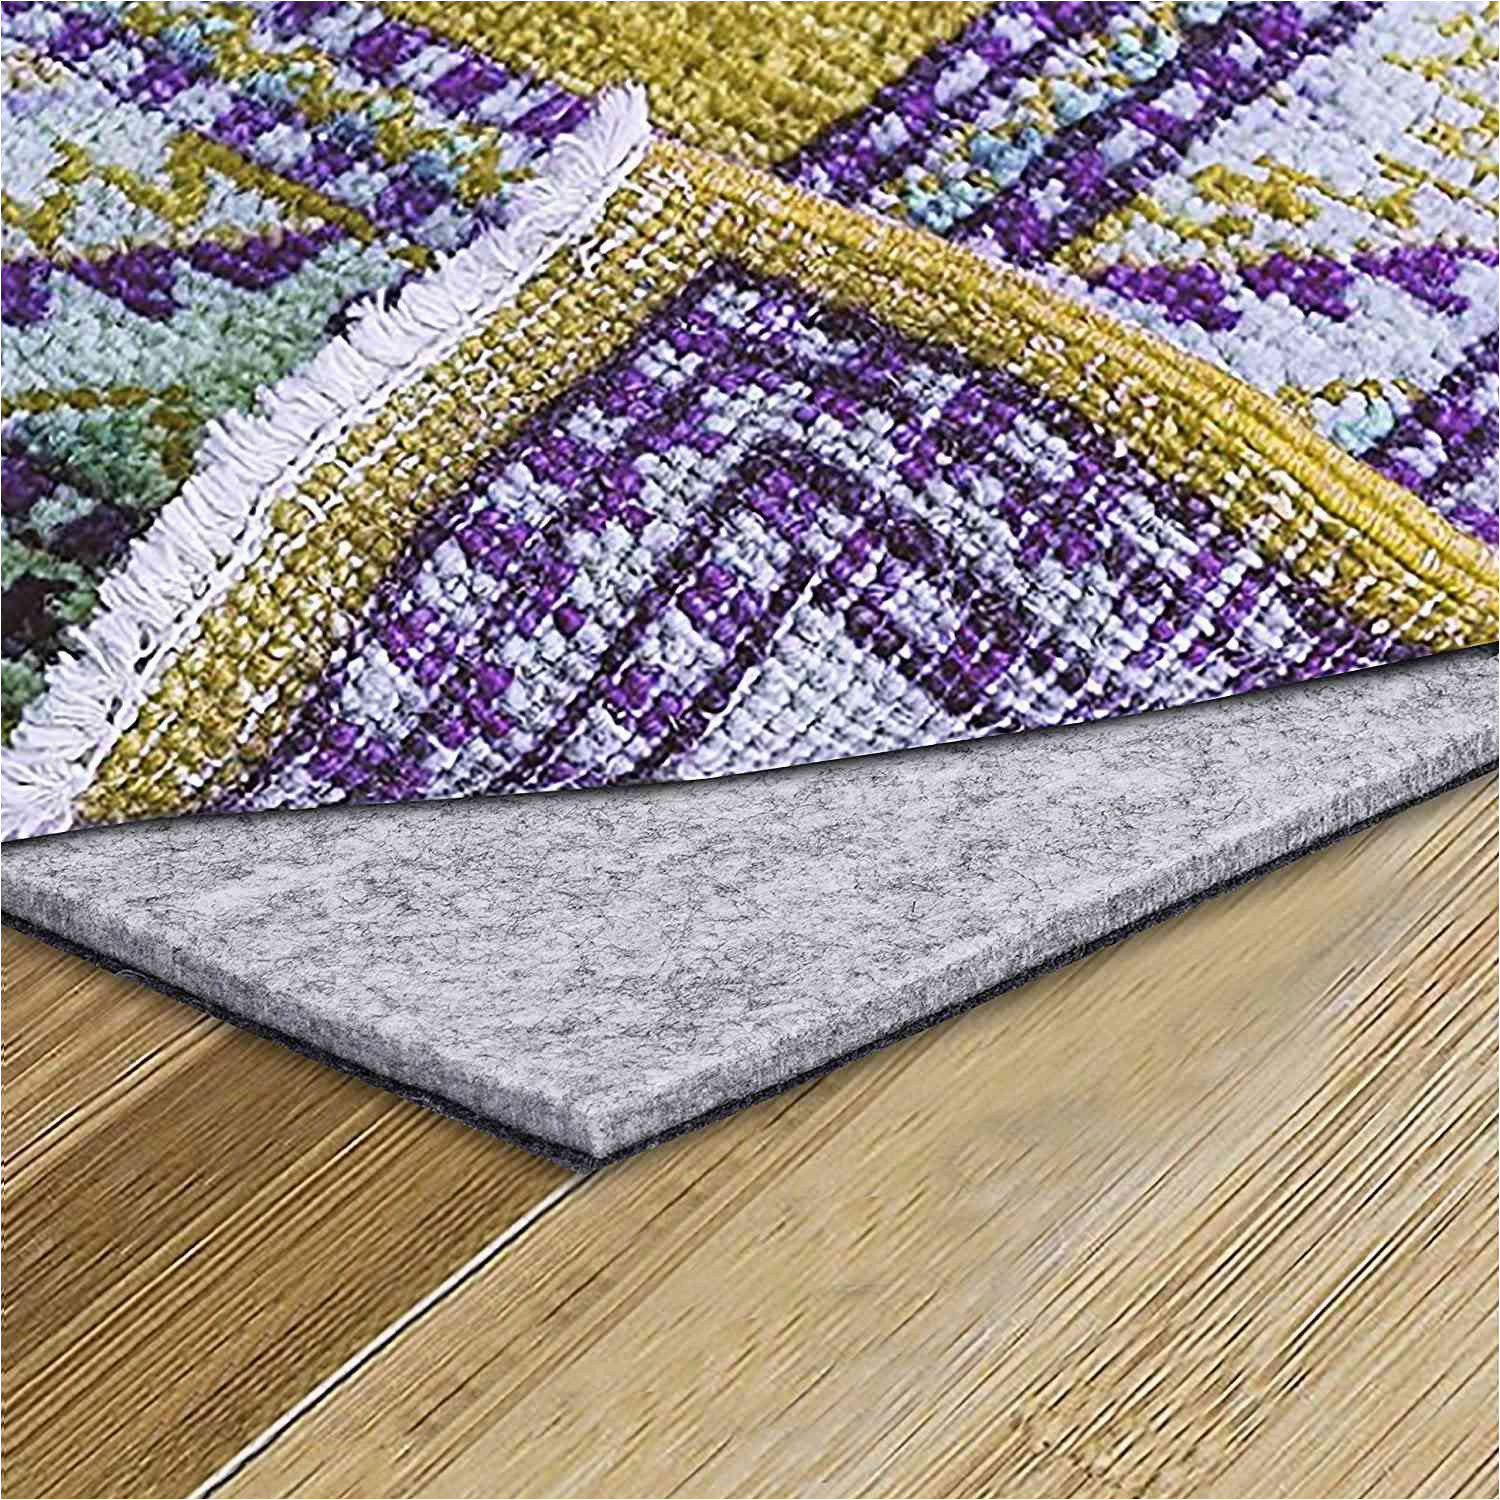 Best Carpet Pads for area Rugs On Hardwood Floors the 11 Best Rug Pads Of 2022 Tested by the Spruce